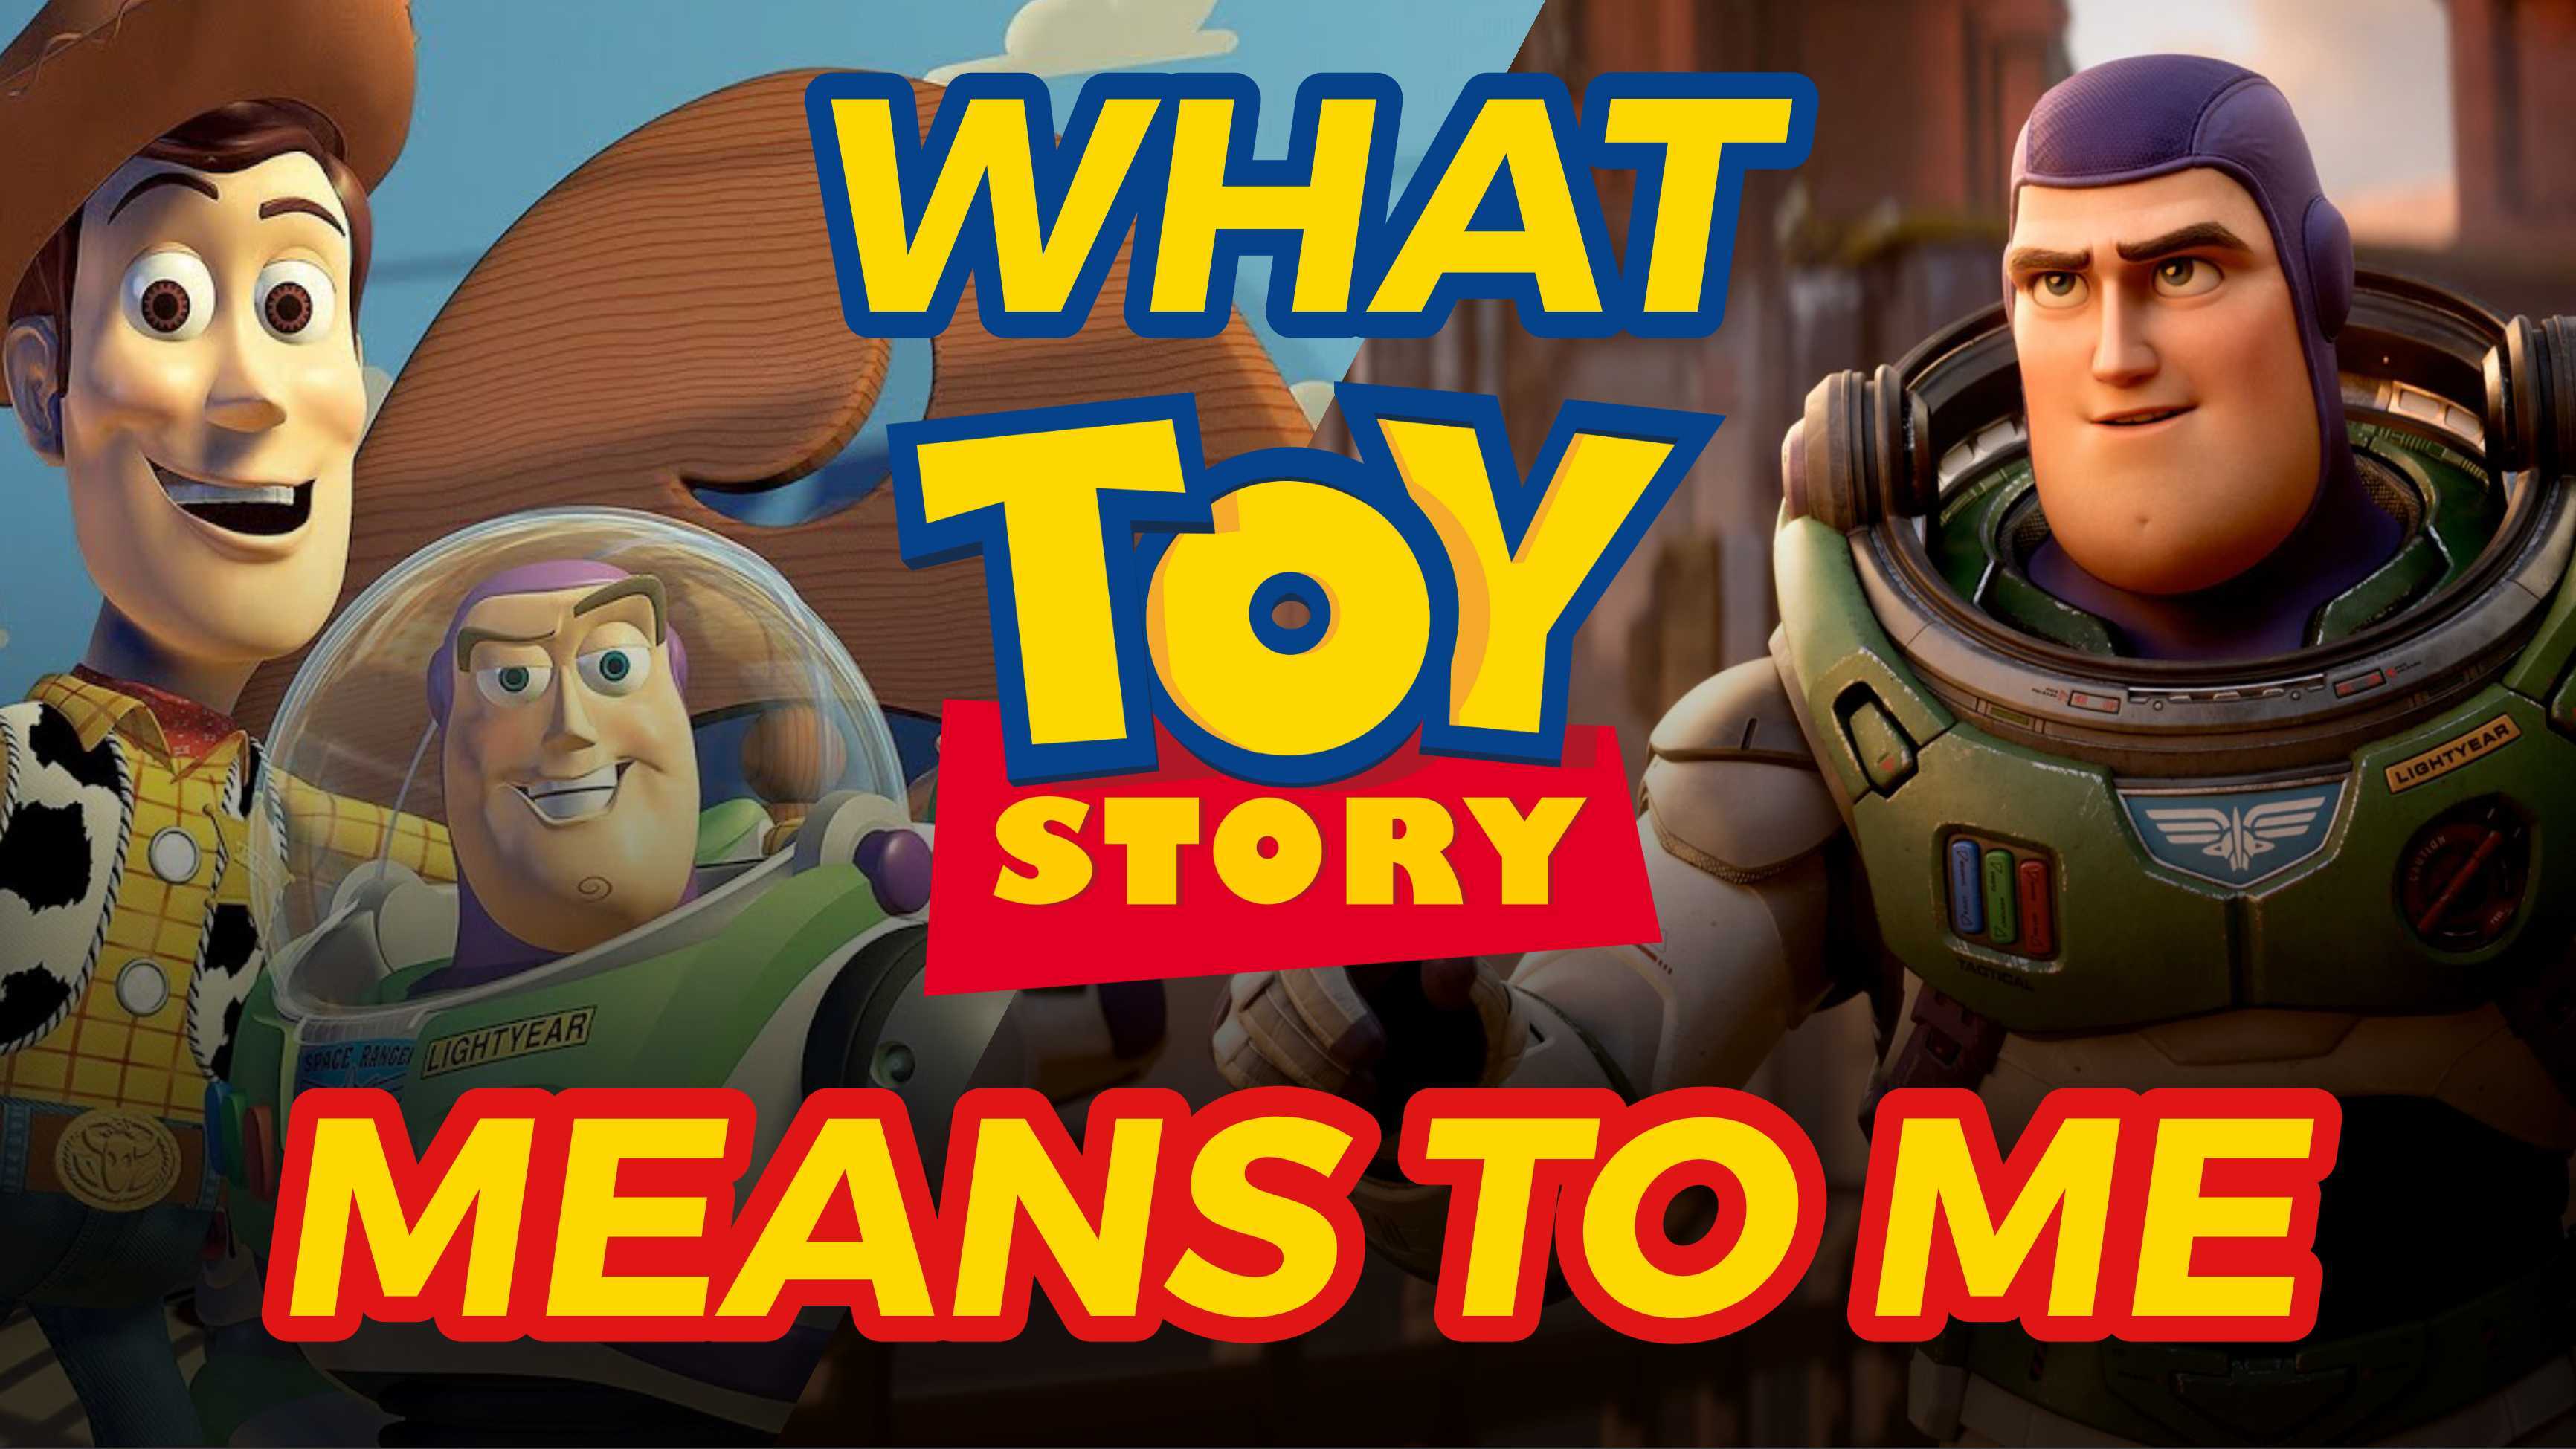 To Infinity and Beyond: What ‘Toy Story’ Means To Me